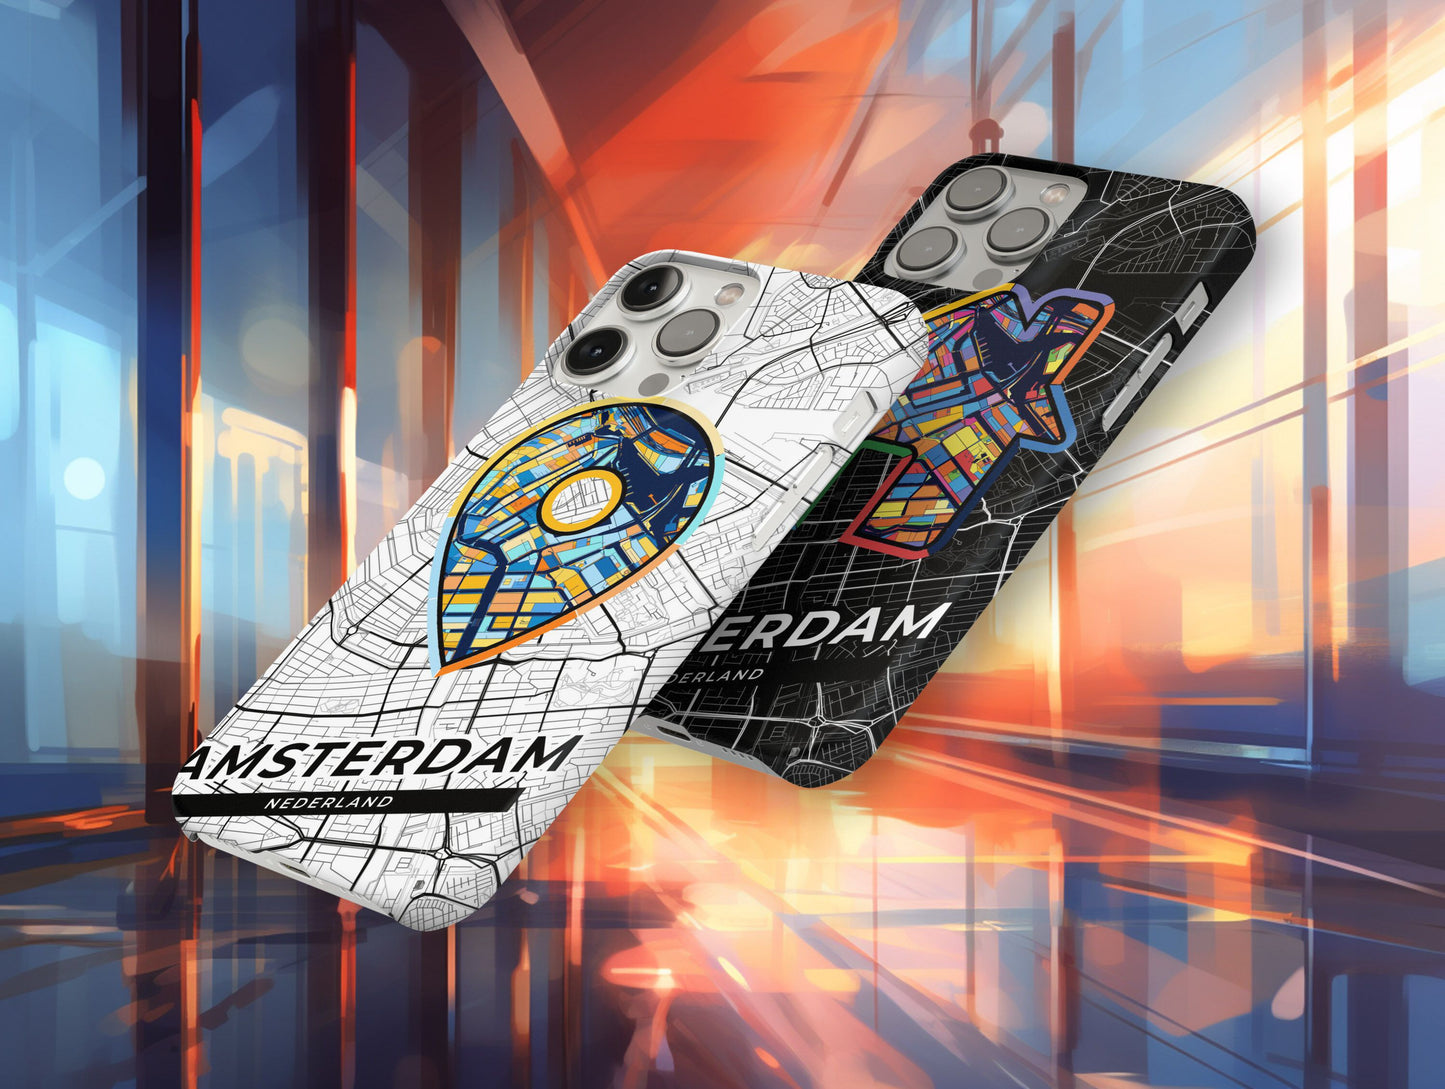 Amsterdam Netherlands slim phone case with colorful icon. Birthday, wedding or housewarming gift. Couple match cases.